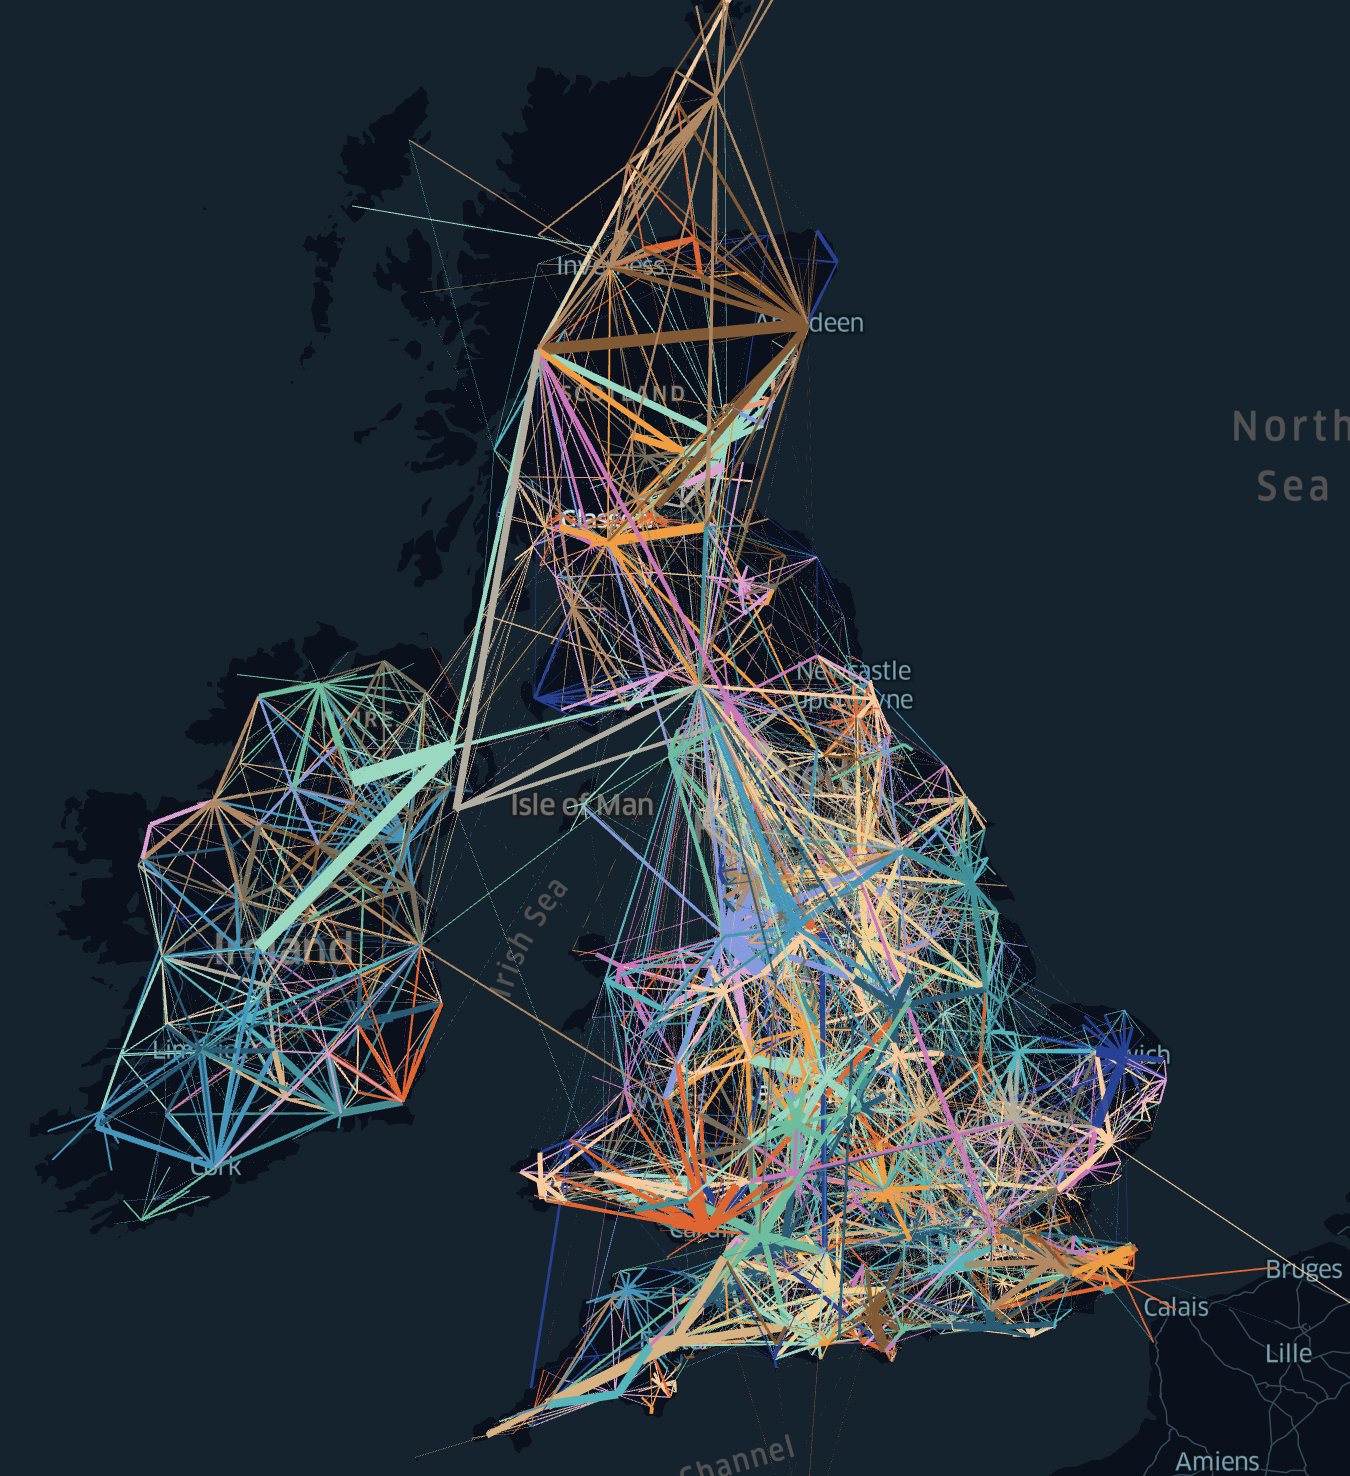 A diagram of the UK with coloured lines representing connections between places